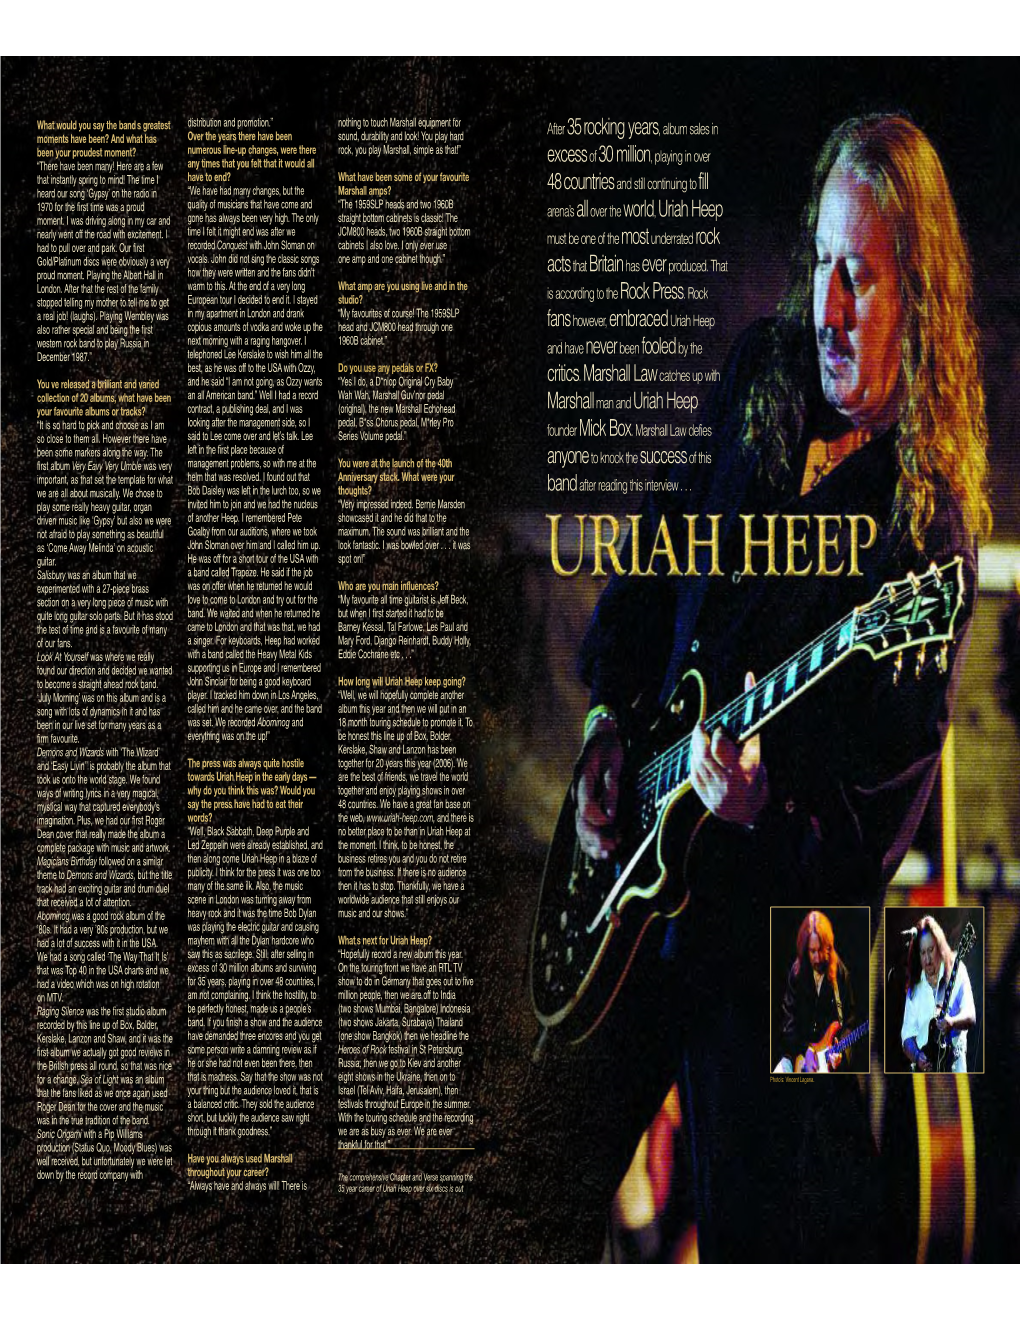 After 35 Rocking Years, Album Sales in Marshallman and Uriah Heep